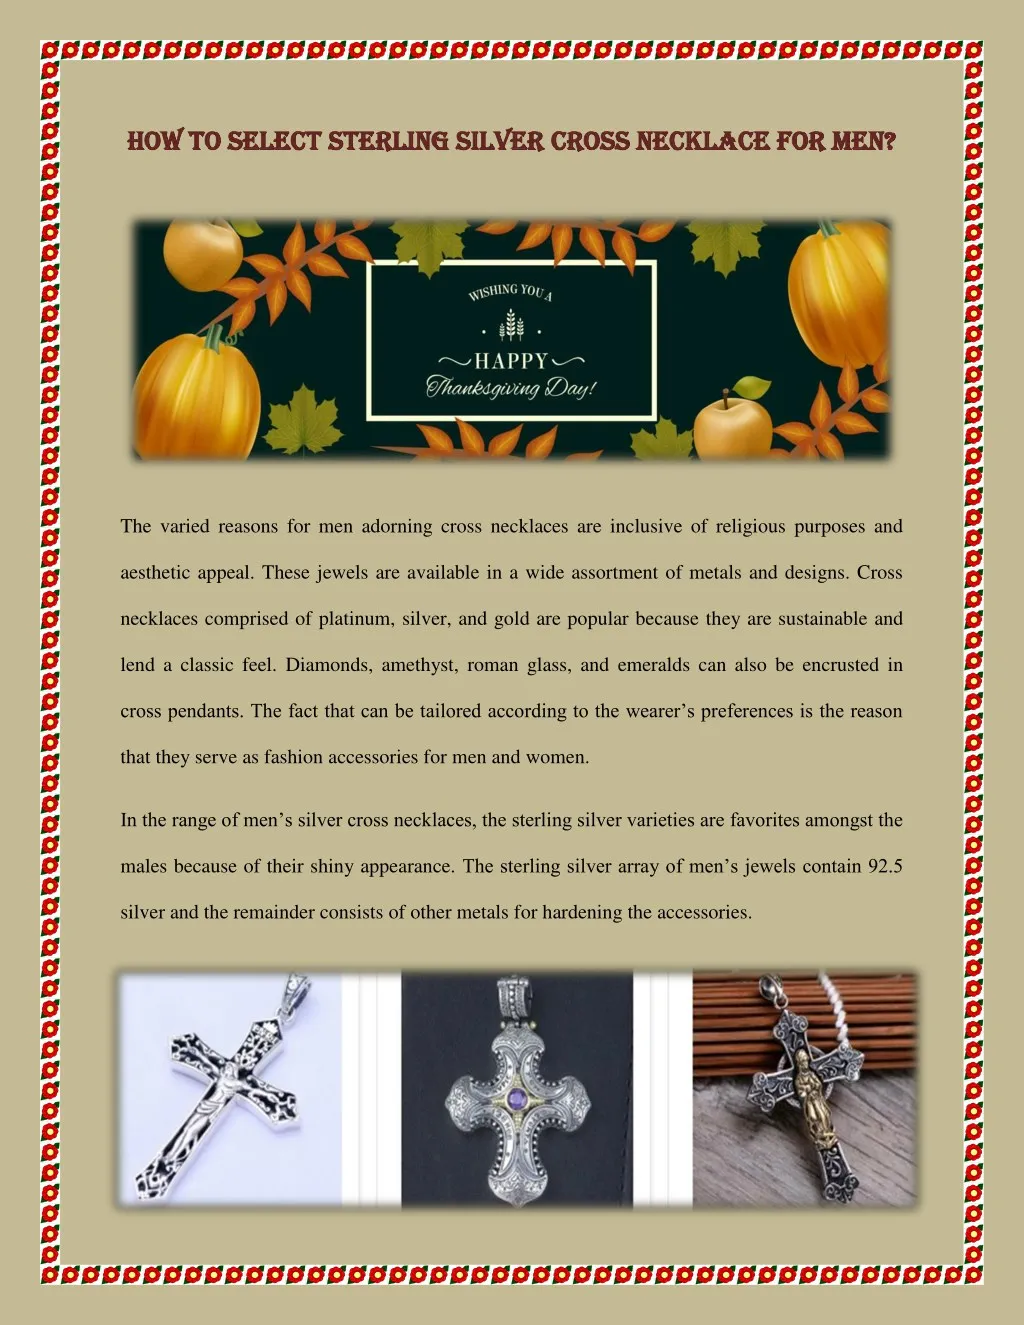 how to select sterling silver cross necklace